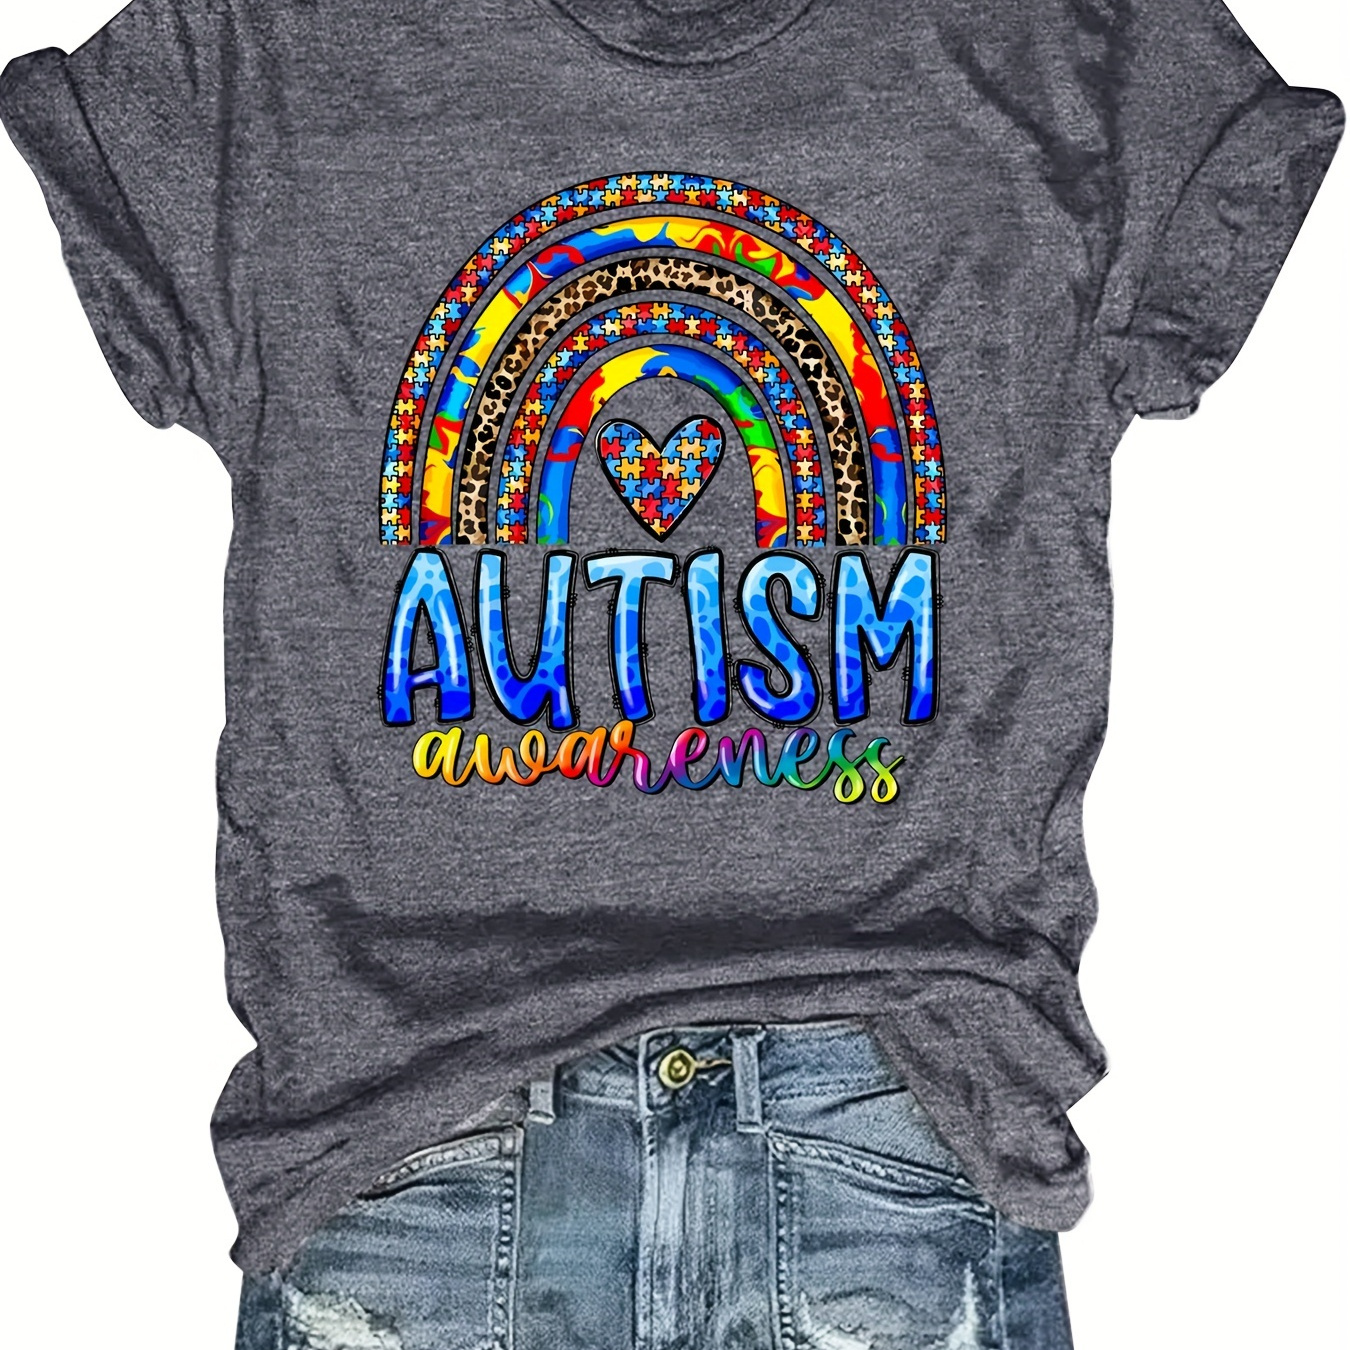 

Plus Size Autism & Rainbow Print T-shirt, Casual Short Sleeve Crew Neck Top For Spring & Summer, Women's Plus Size Clothing